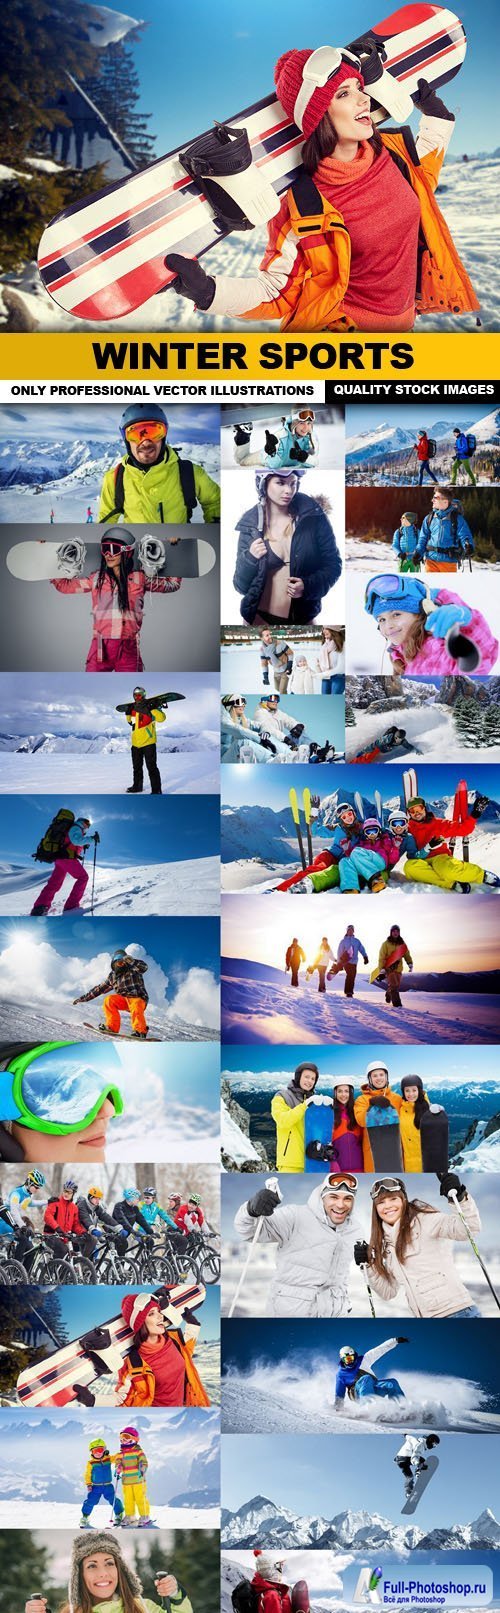 Winter Sports - 25 HQ Images